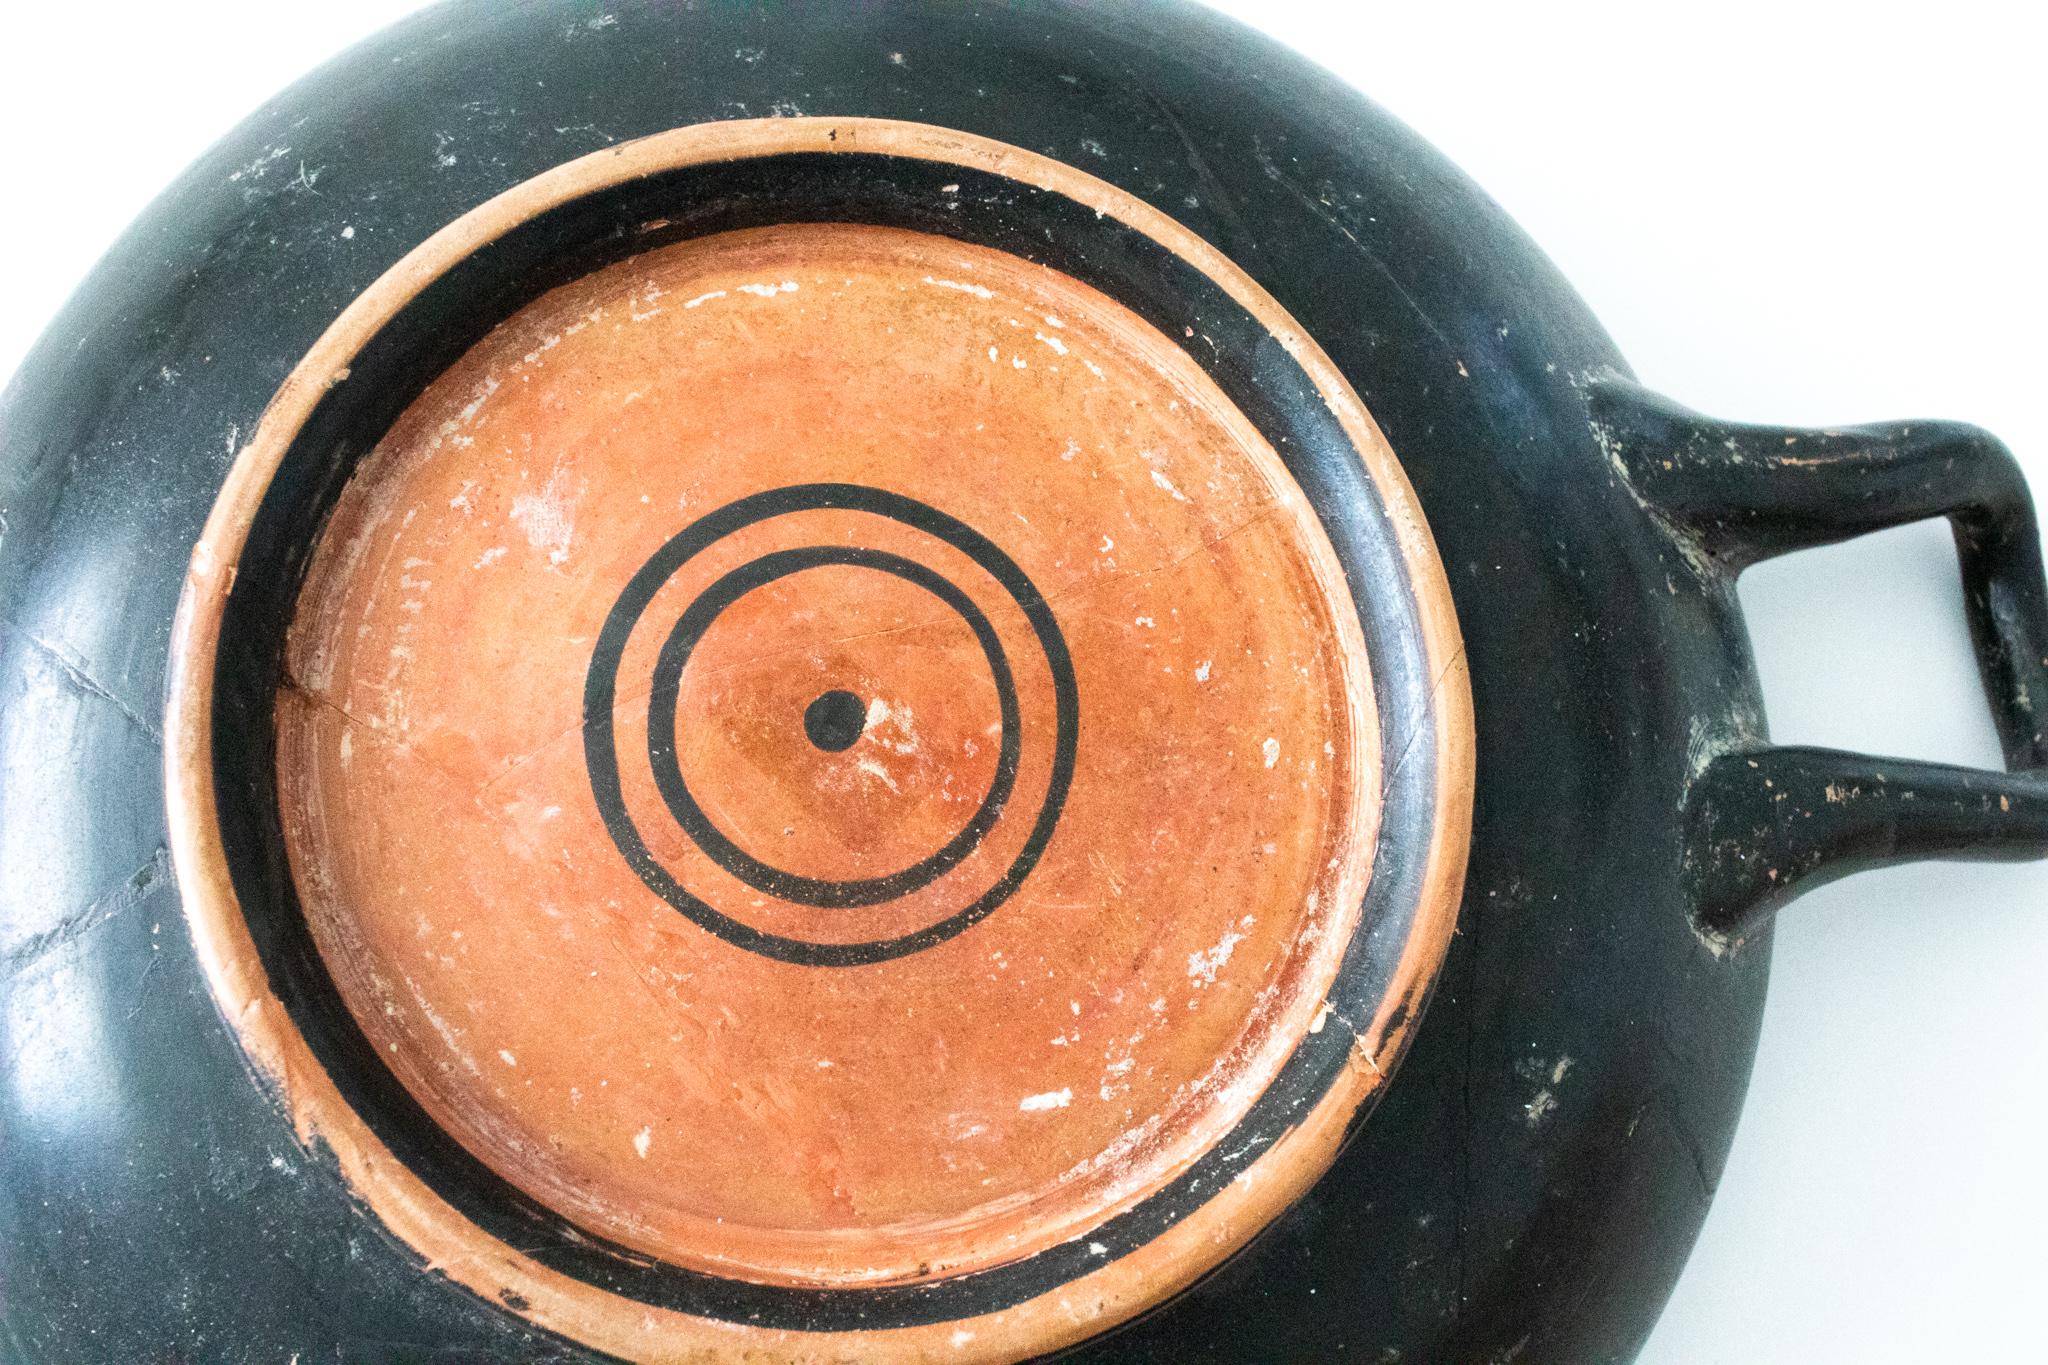 A Ancient Greek Kylix vase.

Campanian ancient Greek red terracotta stemless kylix (drinking cup) with two handles. from the Magna Grecia period. Made between the 350-300 BC in the Greek colonies of the southern Italy peninsula, at Campania. Modeled